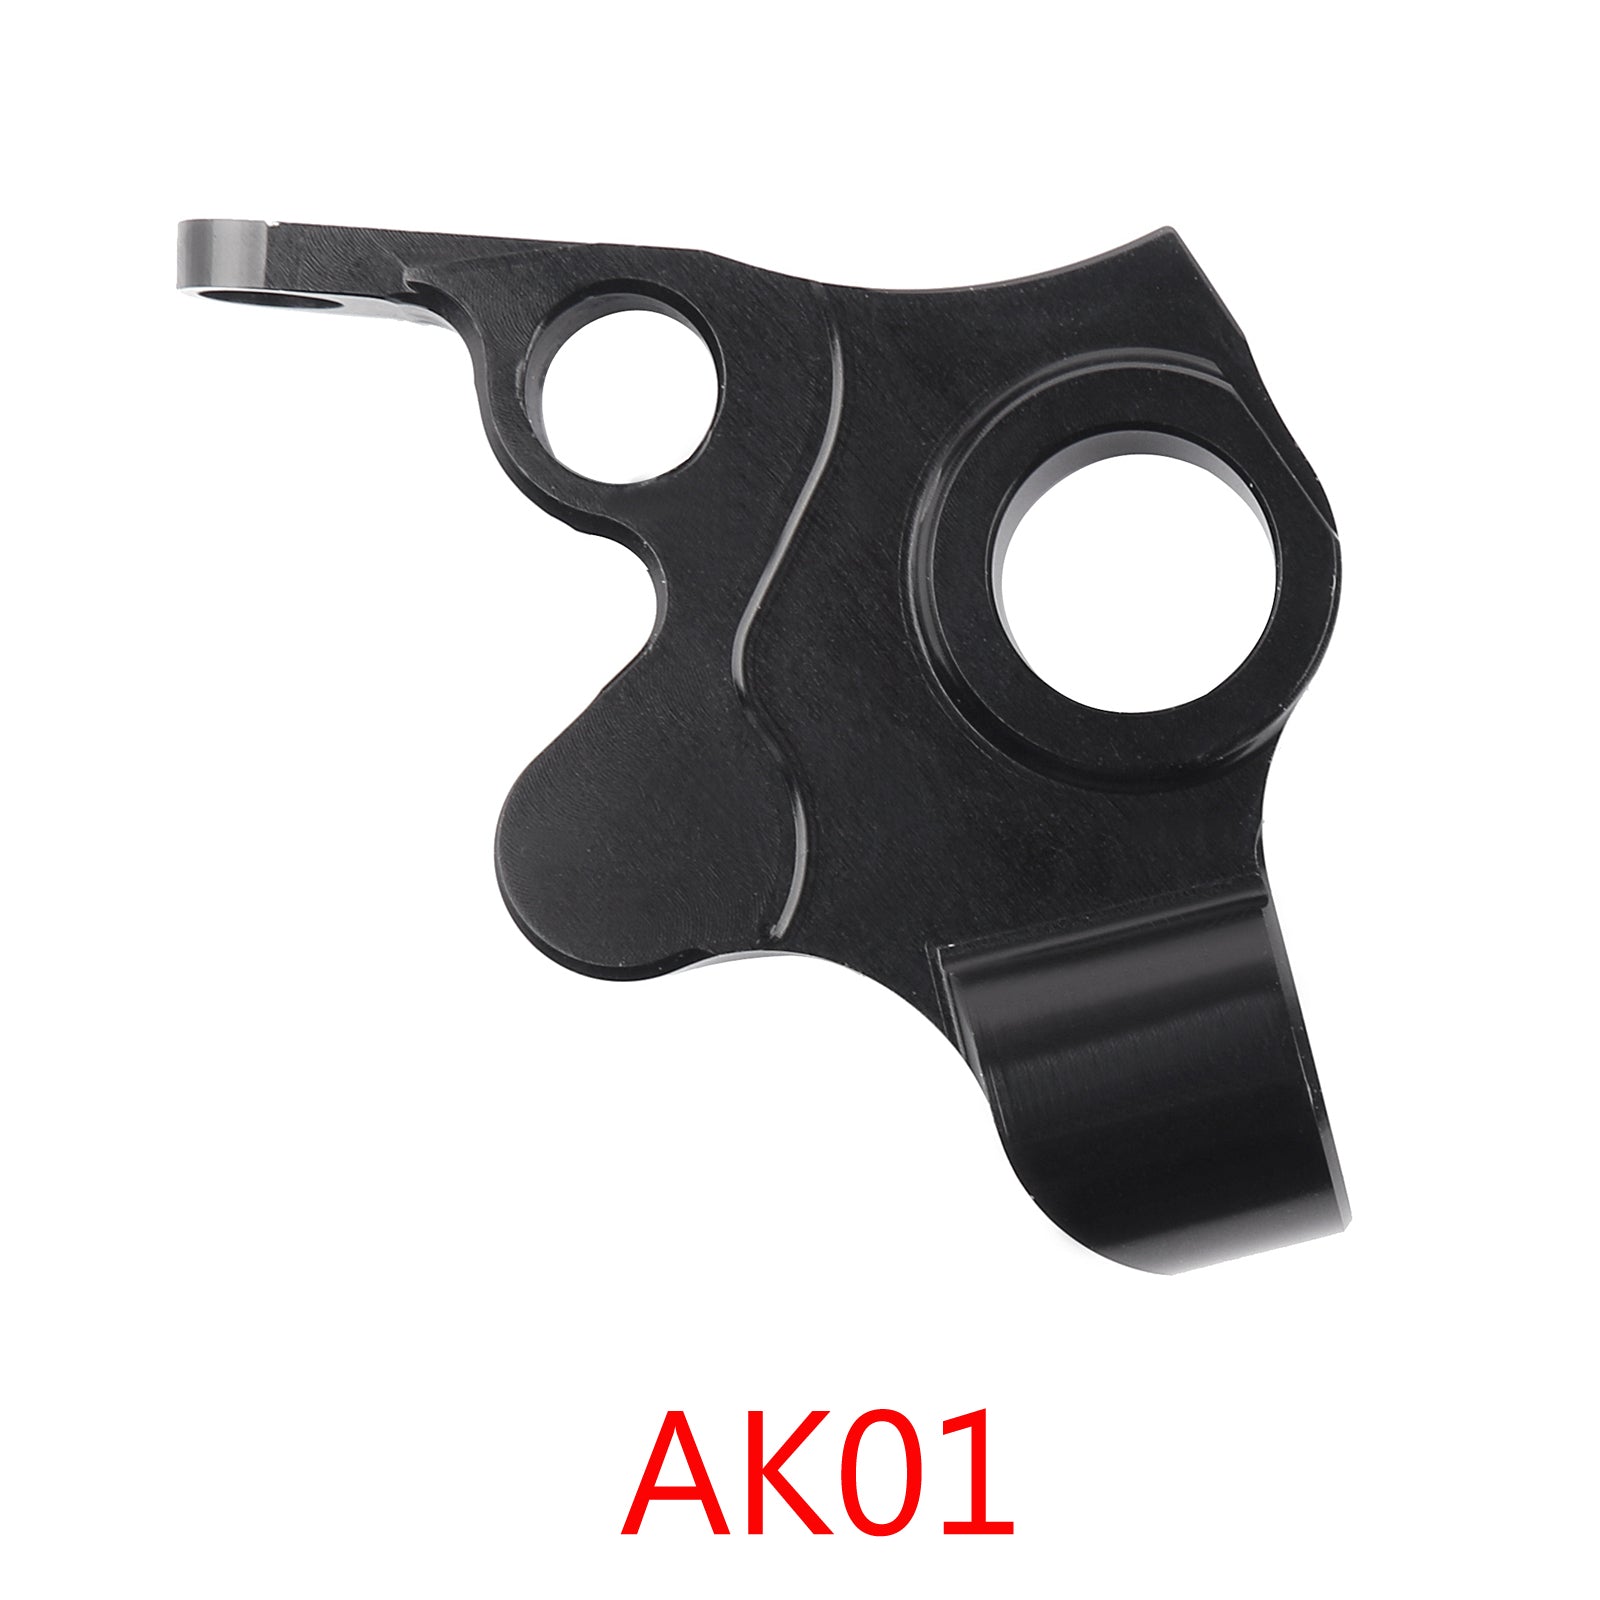 NEW Short Clutch Brake Lever fit for KYMCO 2017-2018 AK550